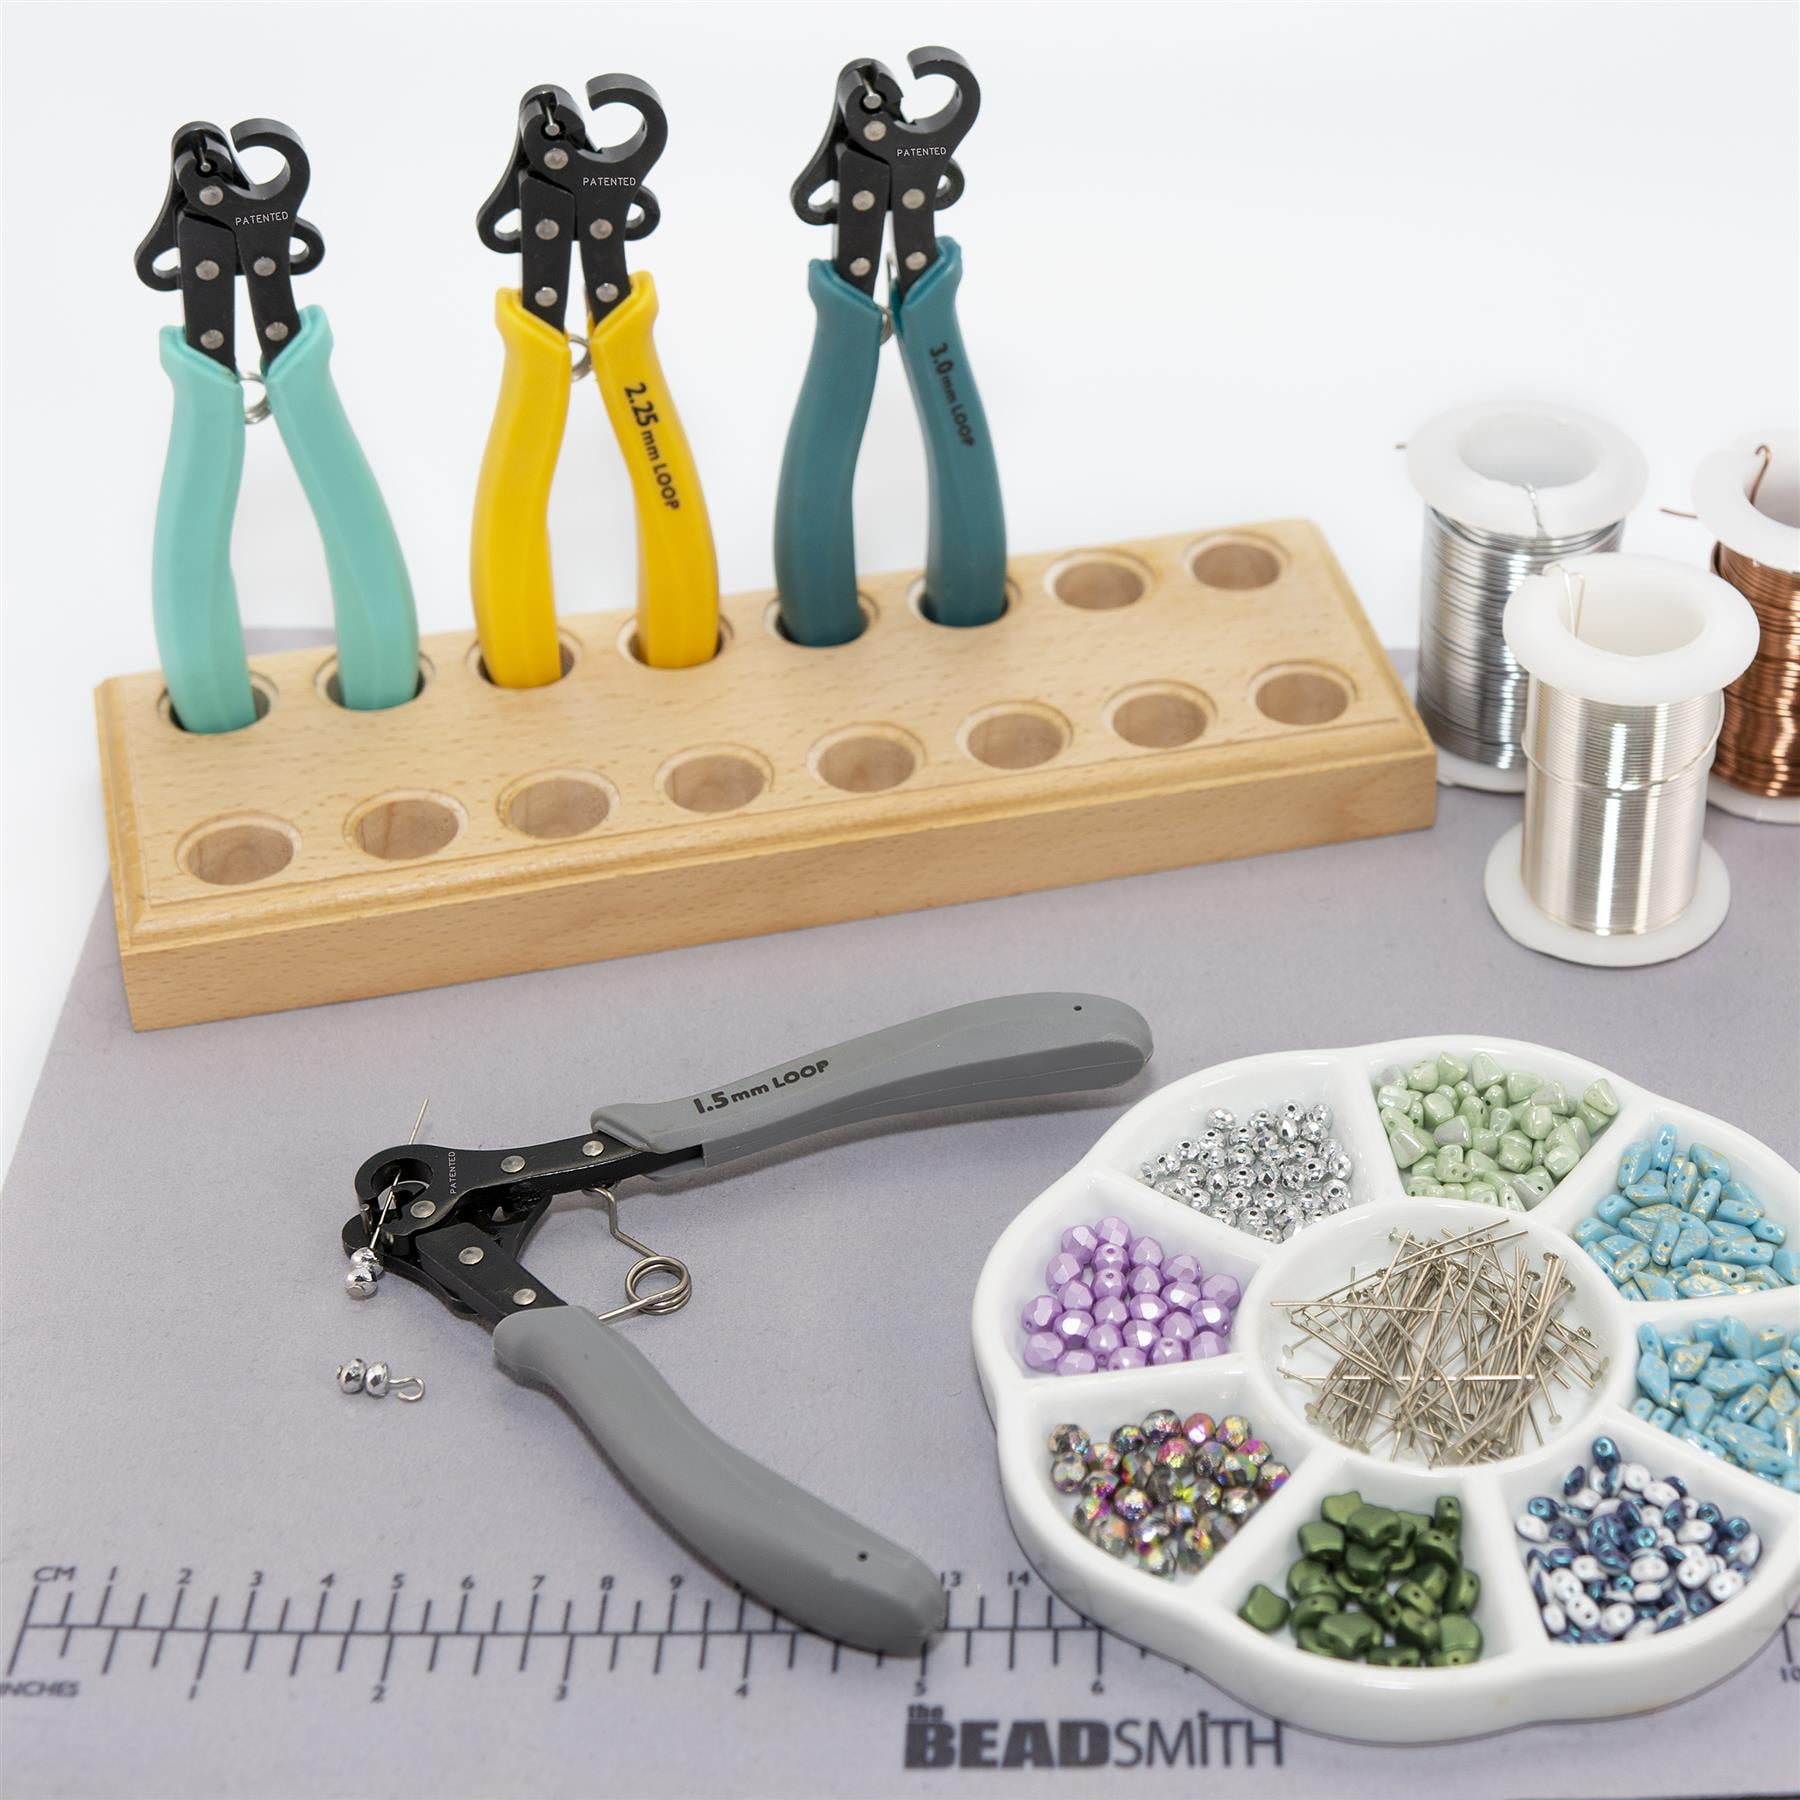 The Beadsmith 1-Step Combo Pack - 1.5mm, 2.25mm & 3mm Looper Pliers -  24-18g Craft Wire - Instantly Create Consistent Loops for Rosaries,  Earrings, Bracelets, Necklaces & Wire Jewelry in One Step 